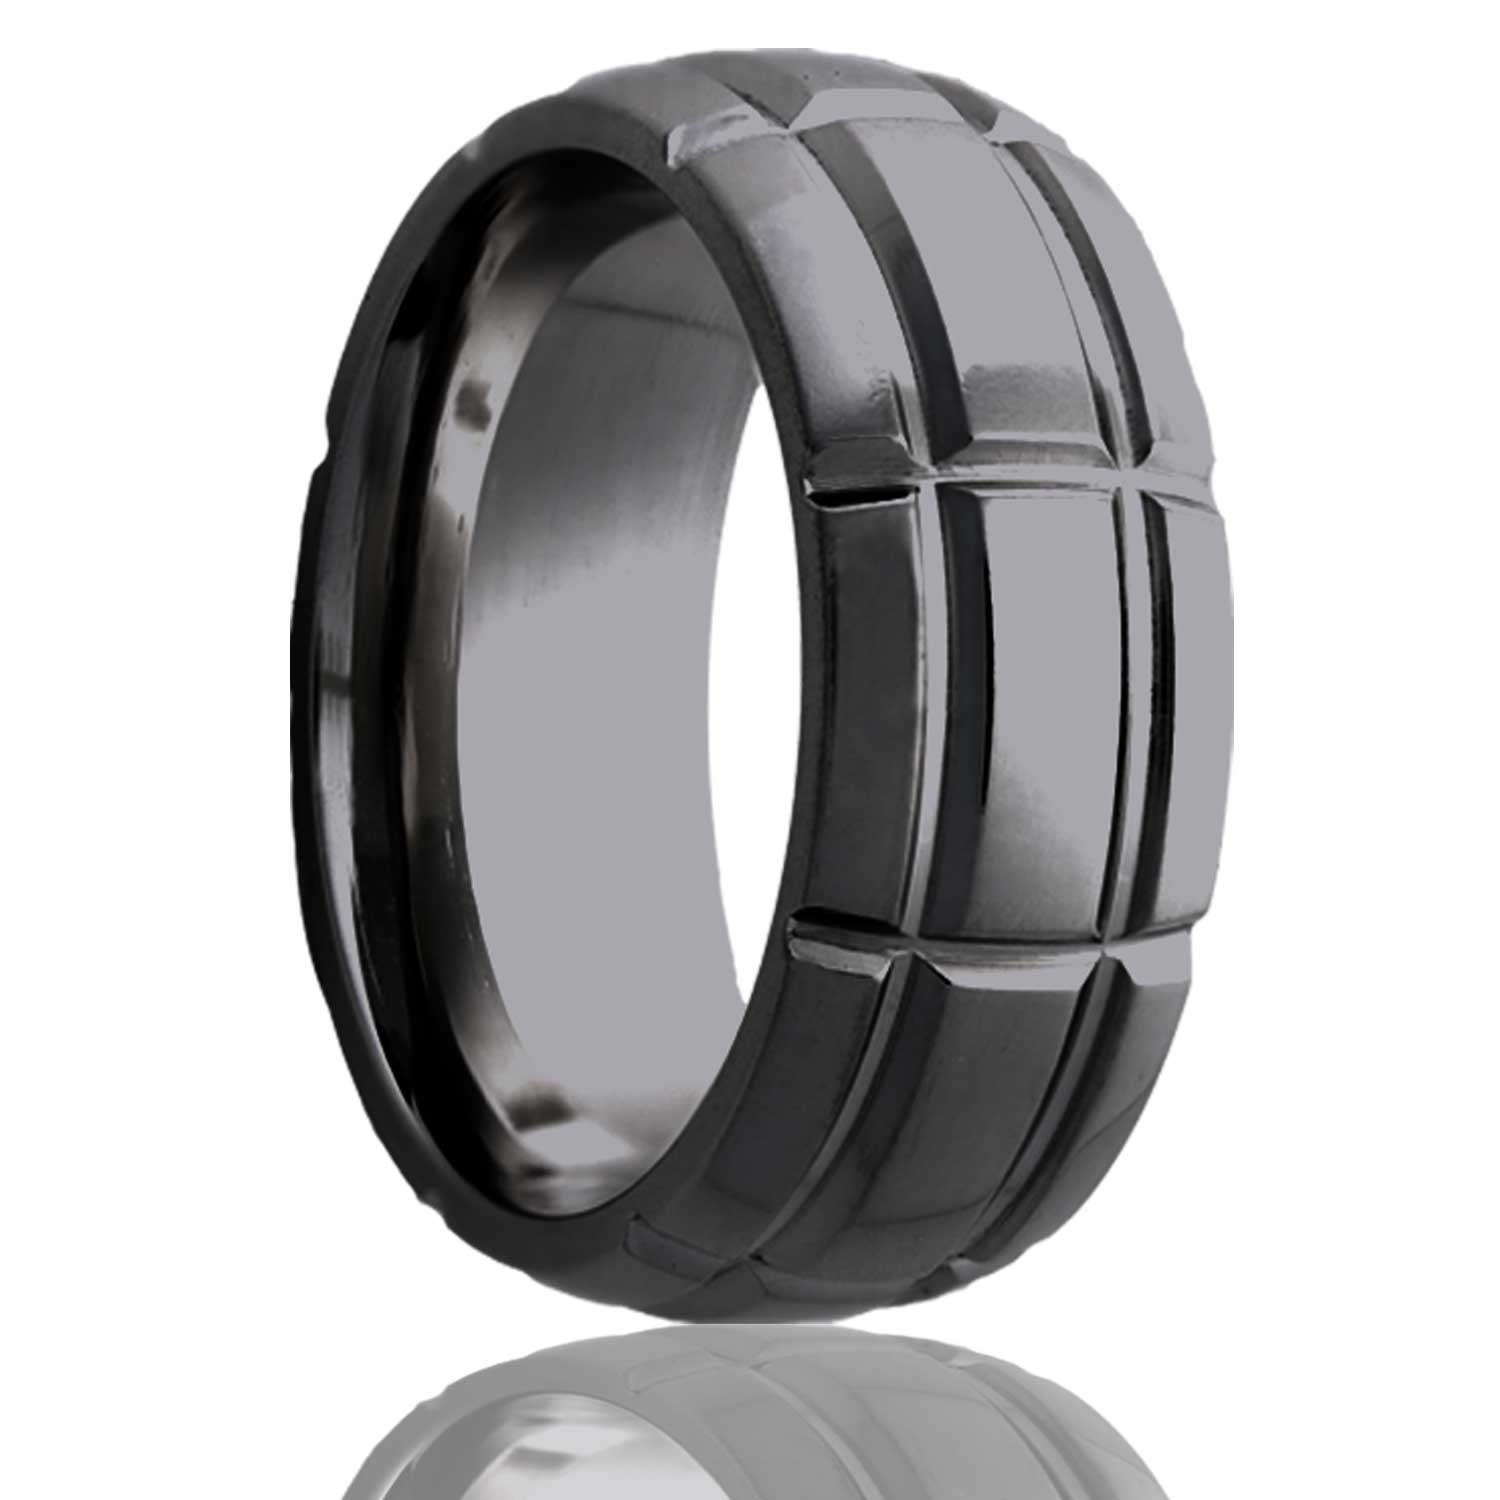 A intersecting groove pattern domed zirconium men's wedding band displayed on a neutral white background.